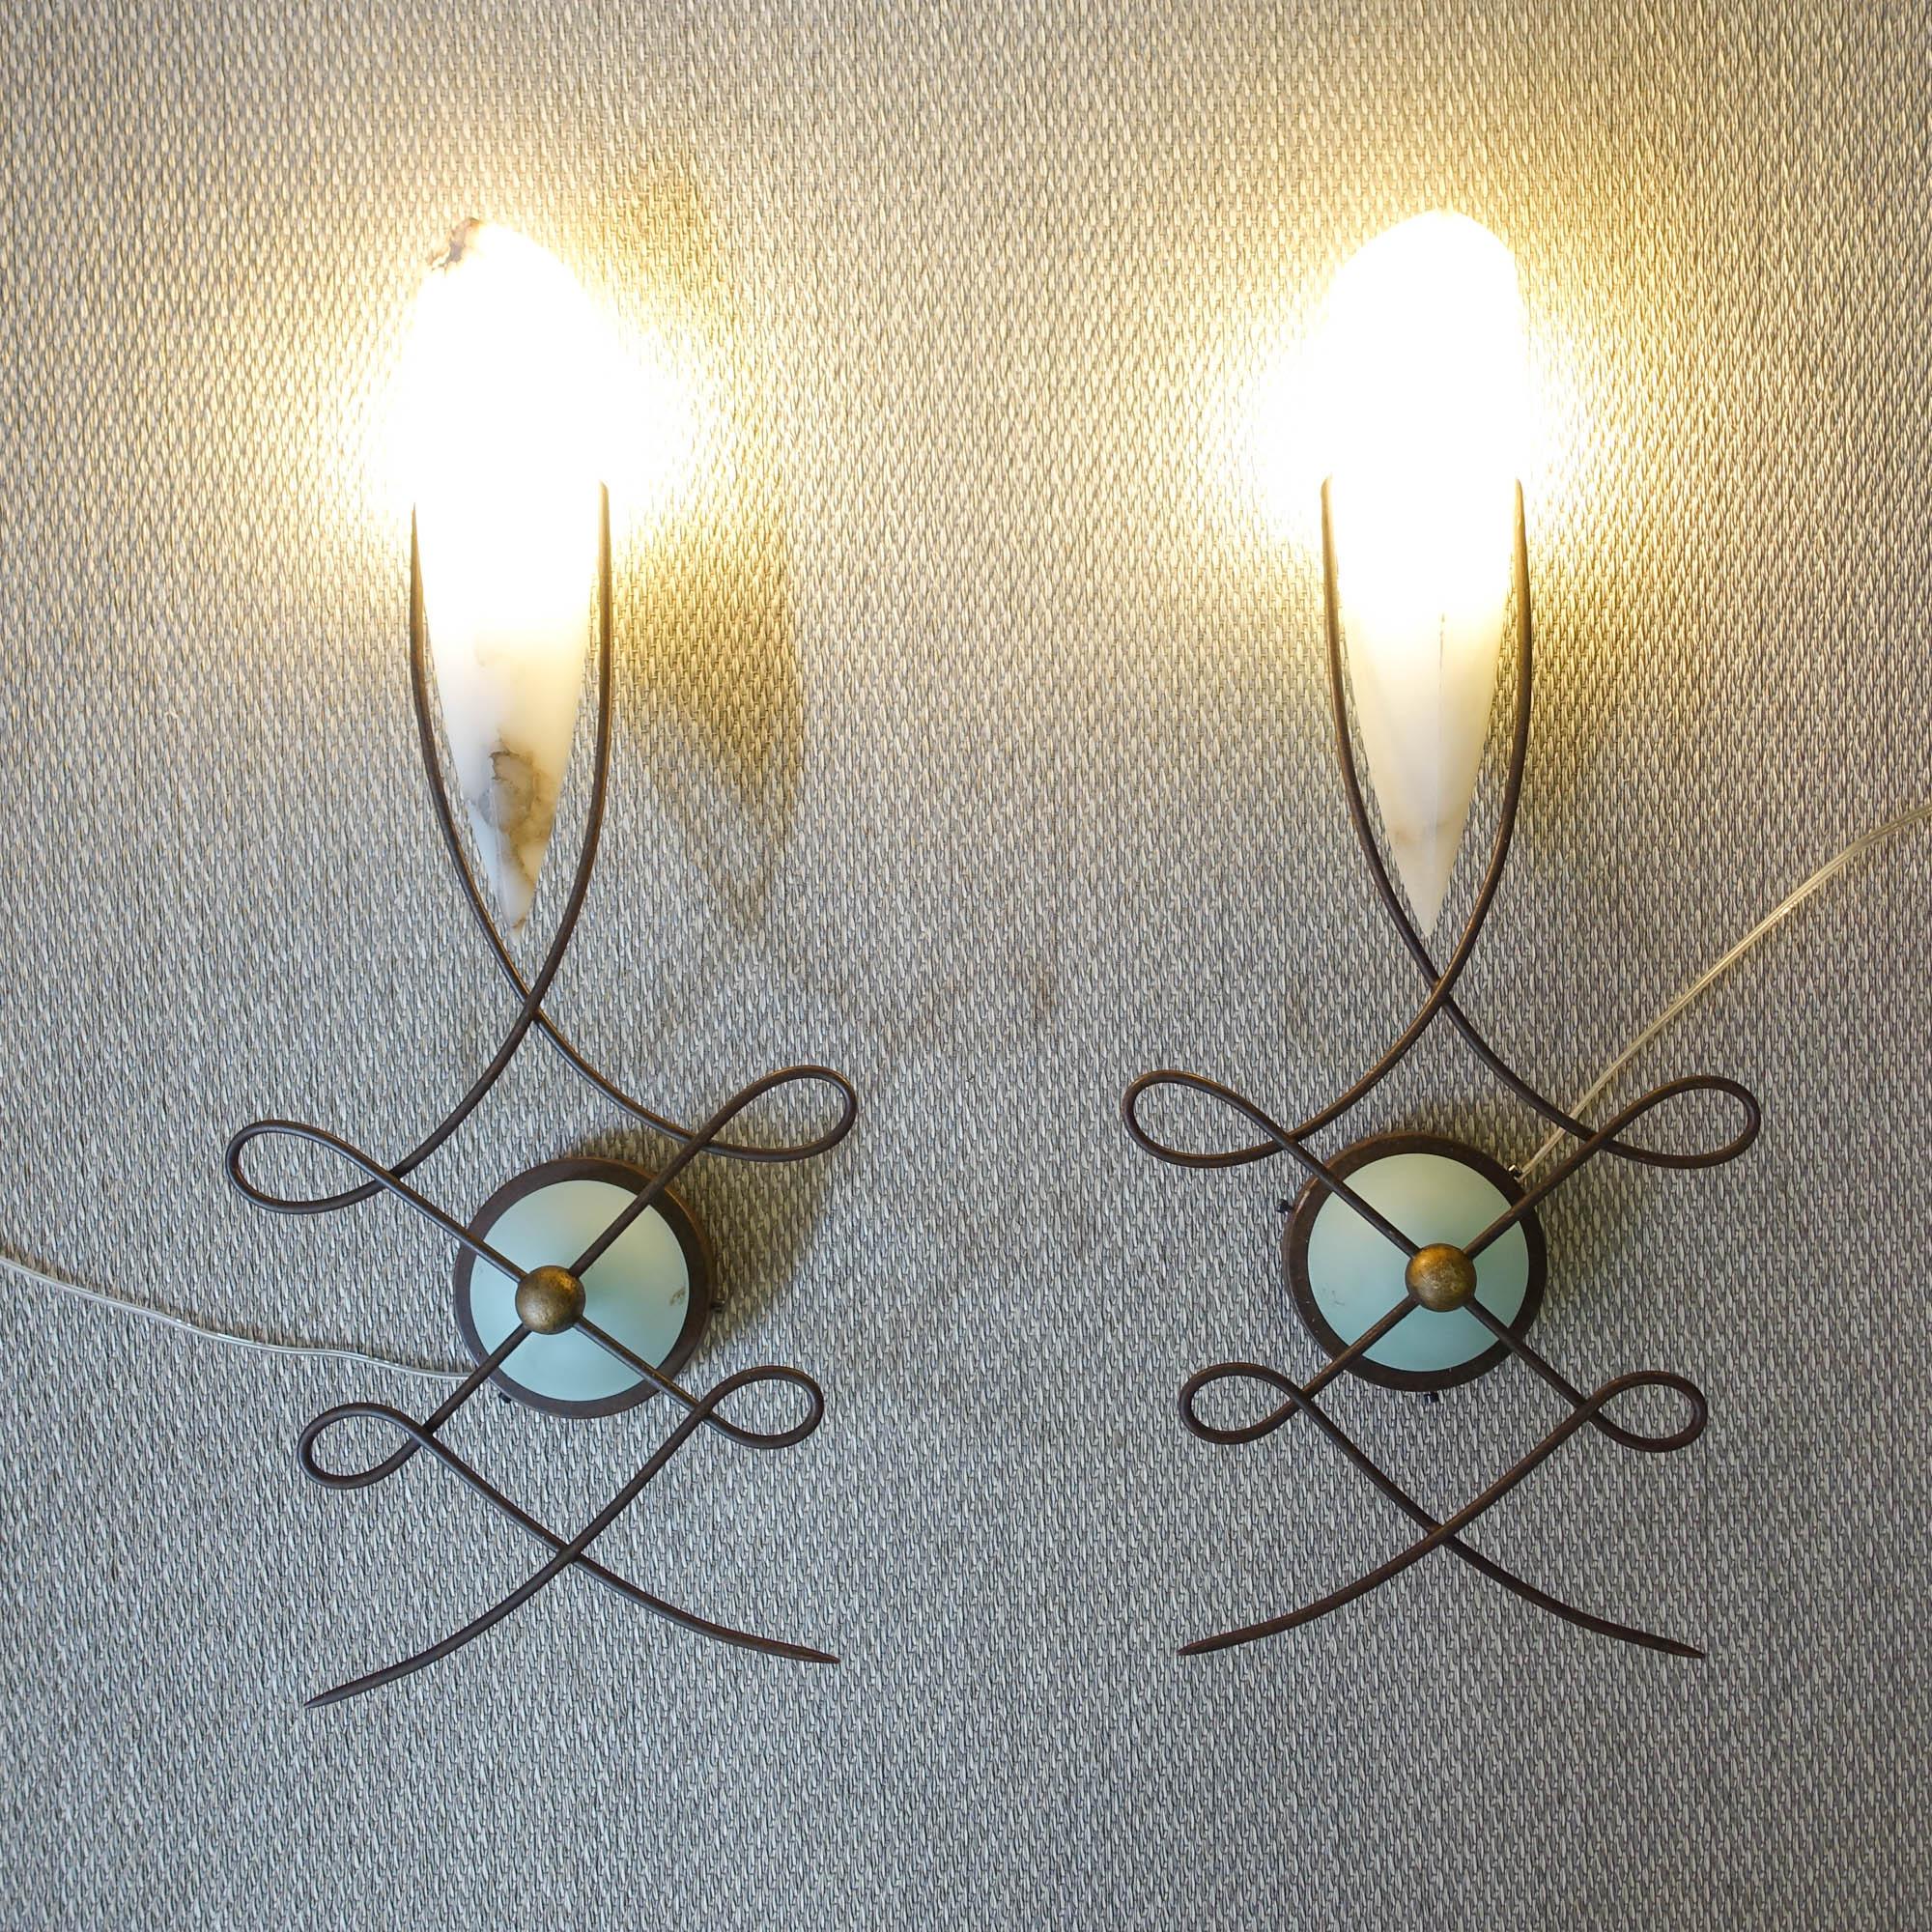 This pair of wall lamps, model Louvre, was designed by Jean-François Crochet for Terzani, in Italy, during the 1980's. These lamps are made of handcrafted metal with a rust finish and a finely crafted cream-colored alabaster shade. The thick